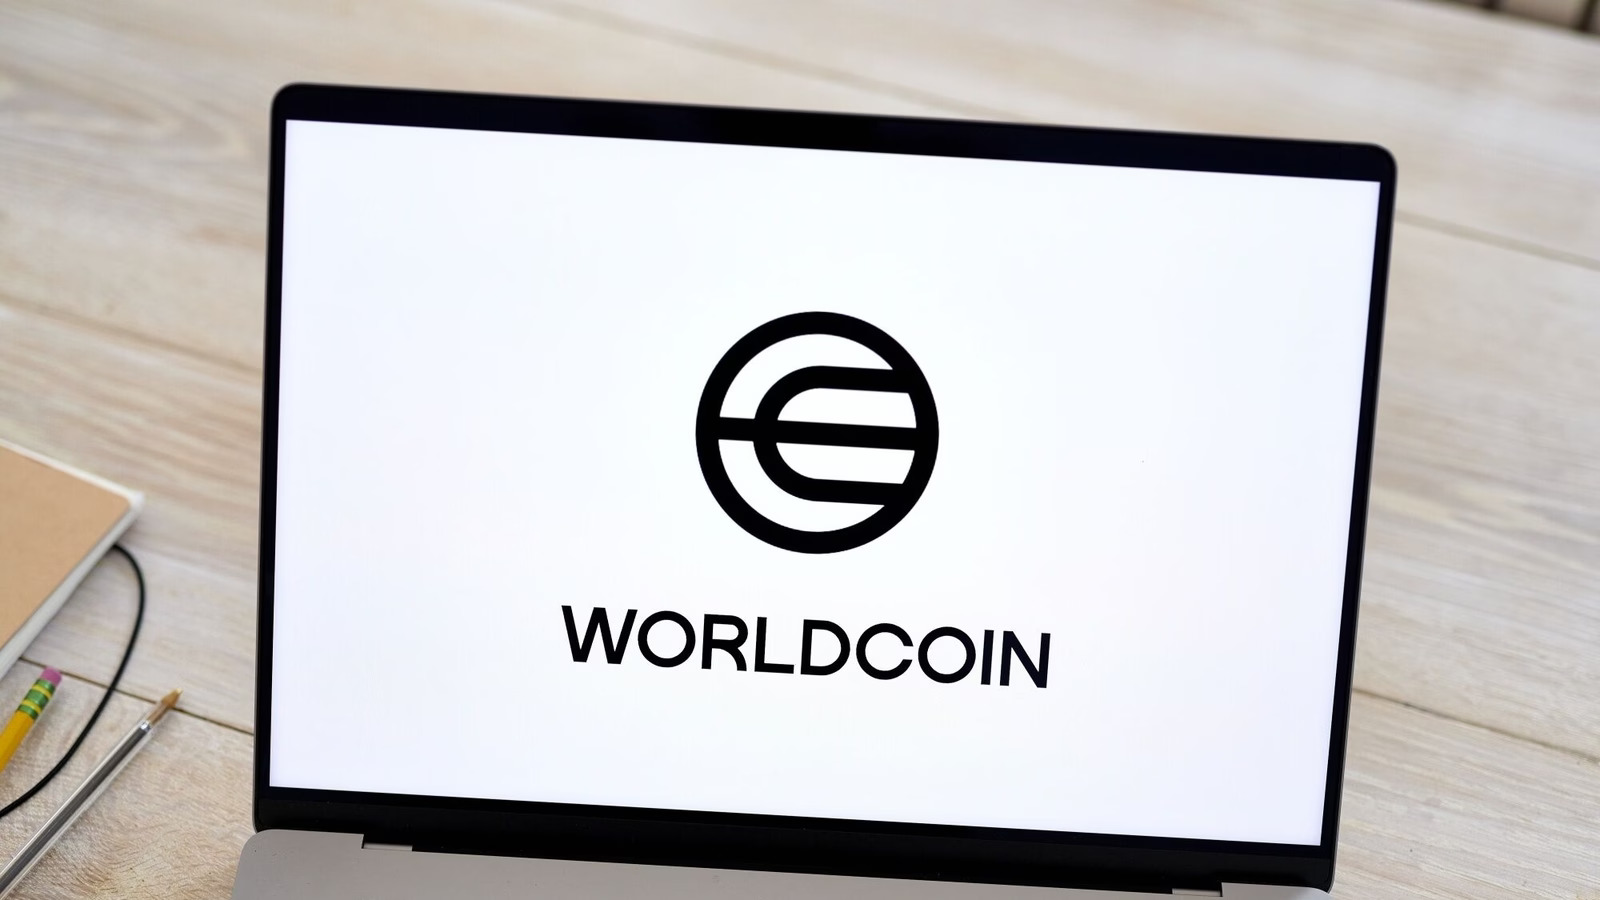 Worldcoin Denies Insider Trading Allegations Amid Token Unlock Delay and Price Surge